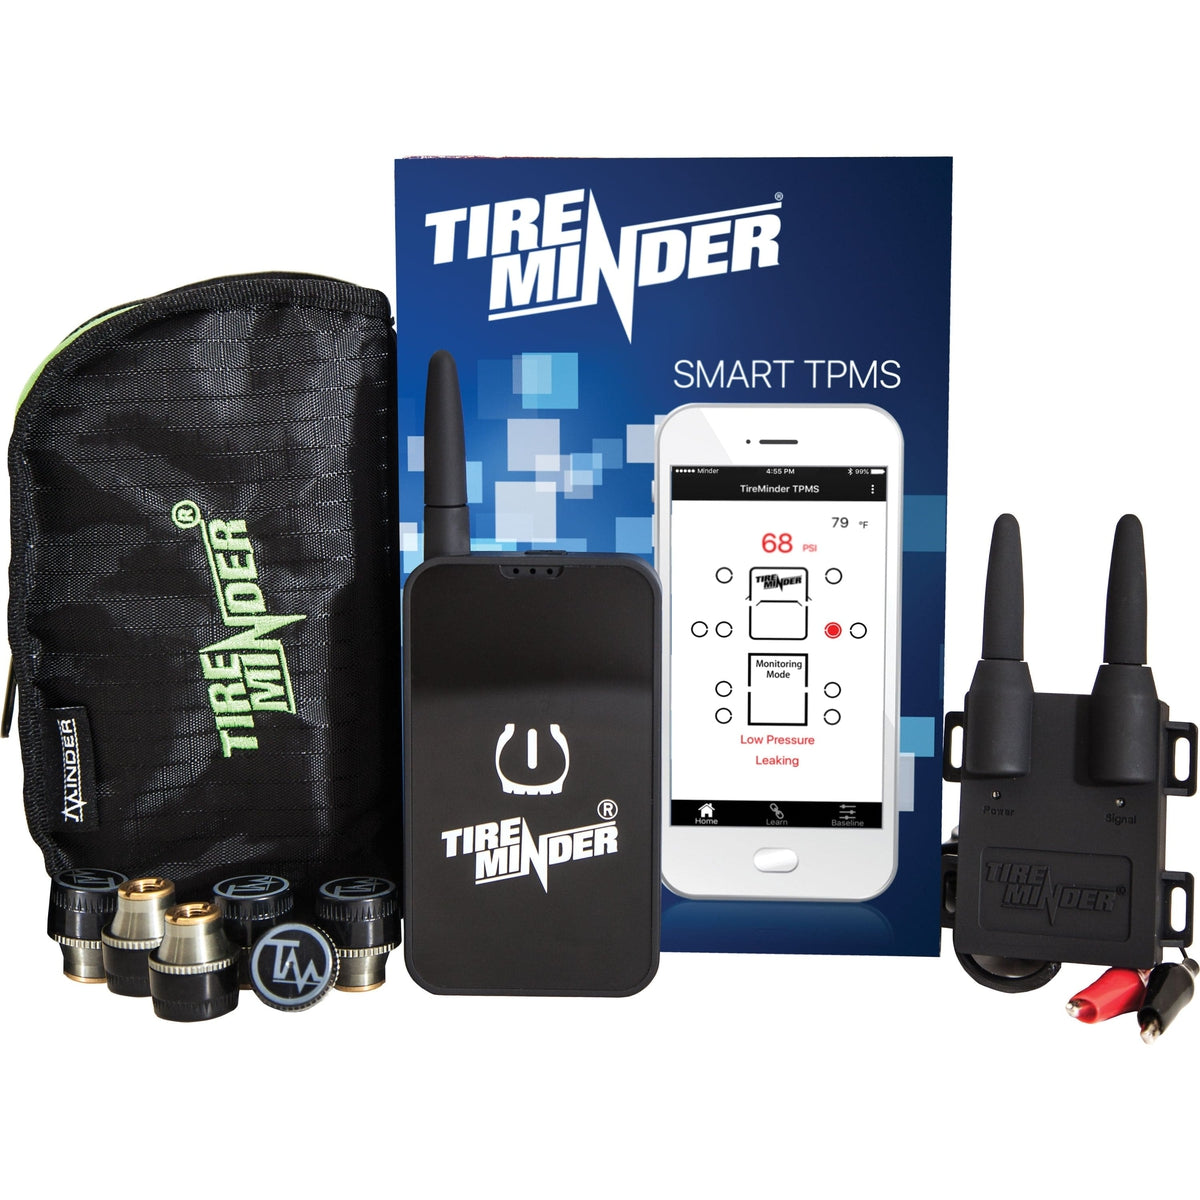 Minder Research Qualifies for Free Shipping Minder First Smart TPMS for RVs #TM22131